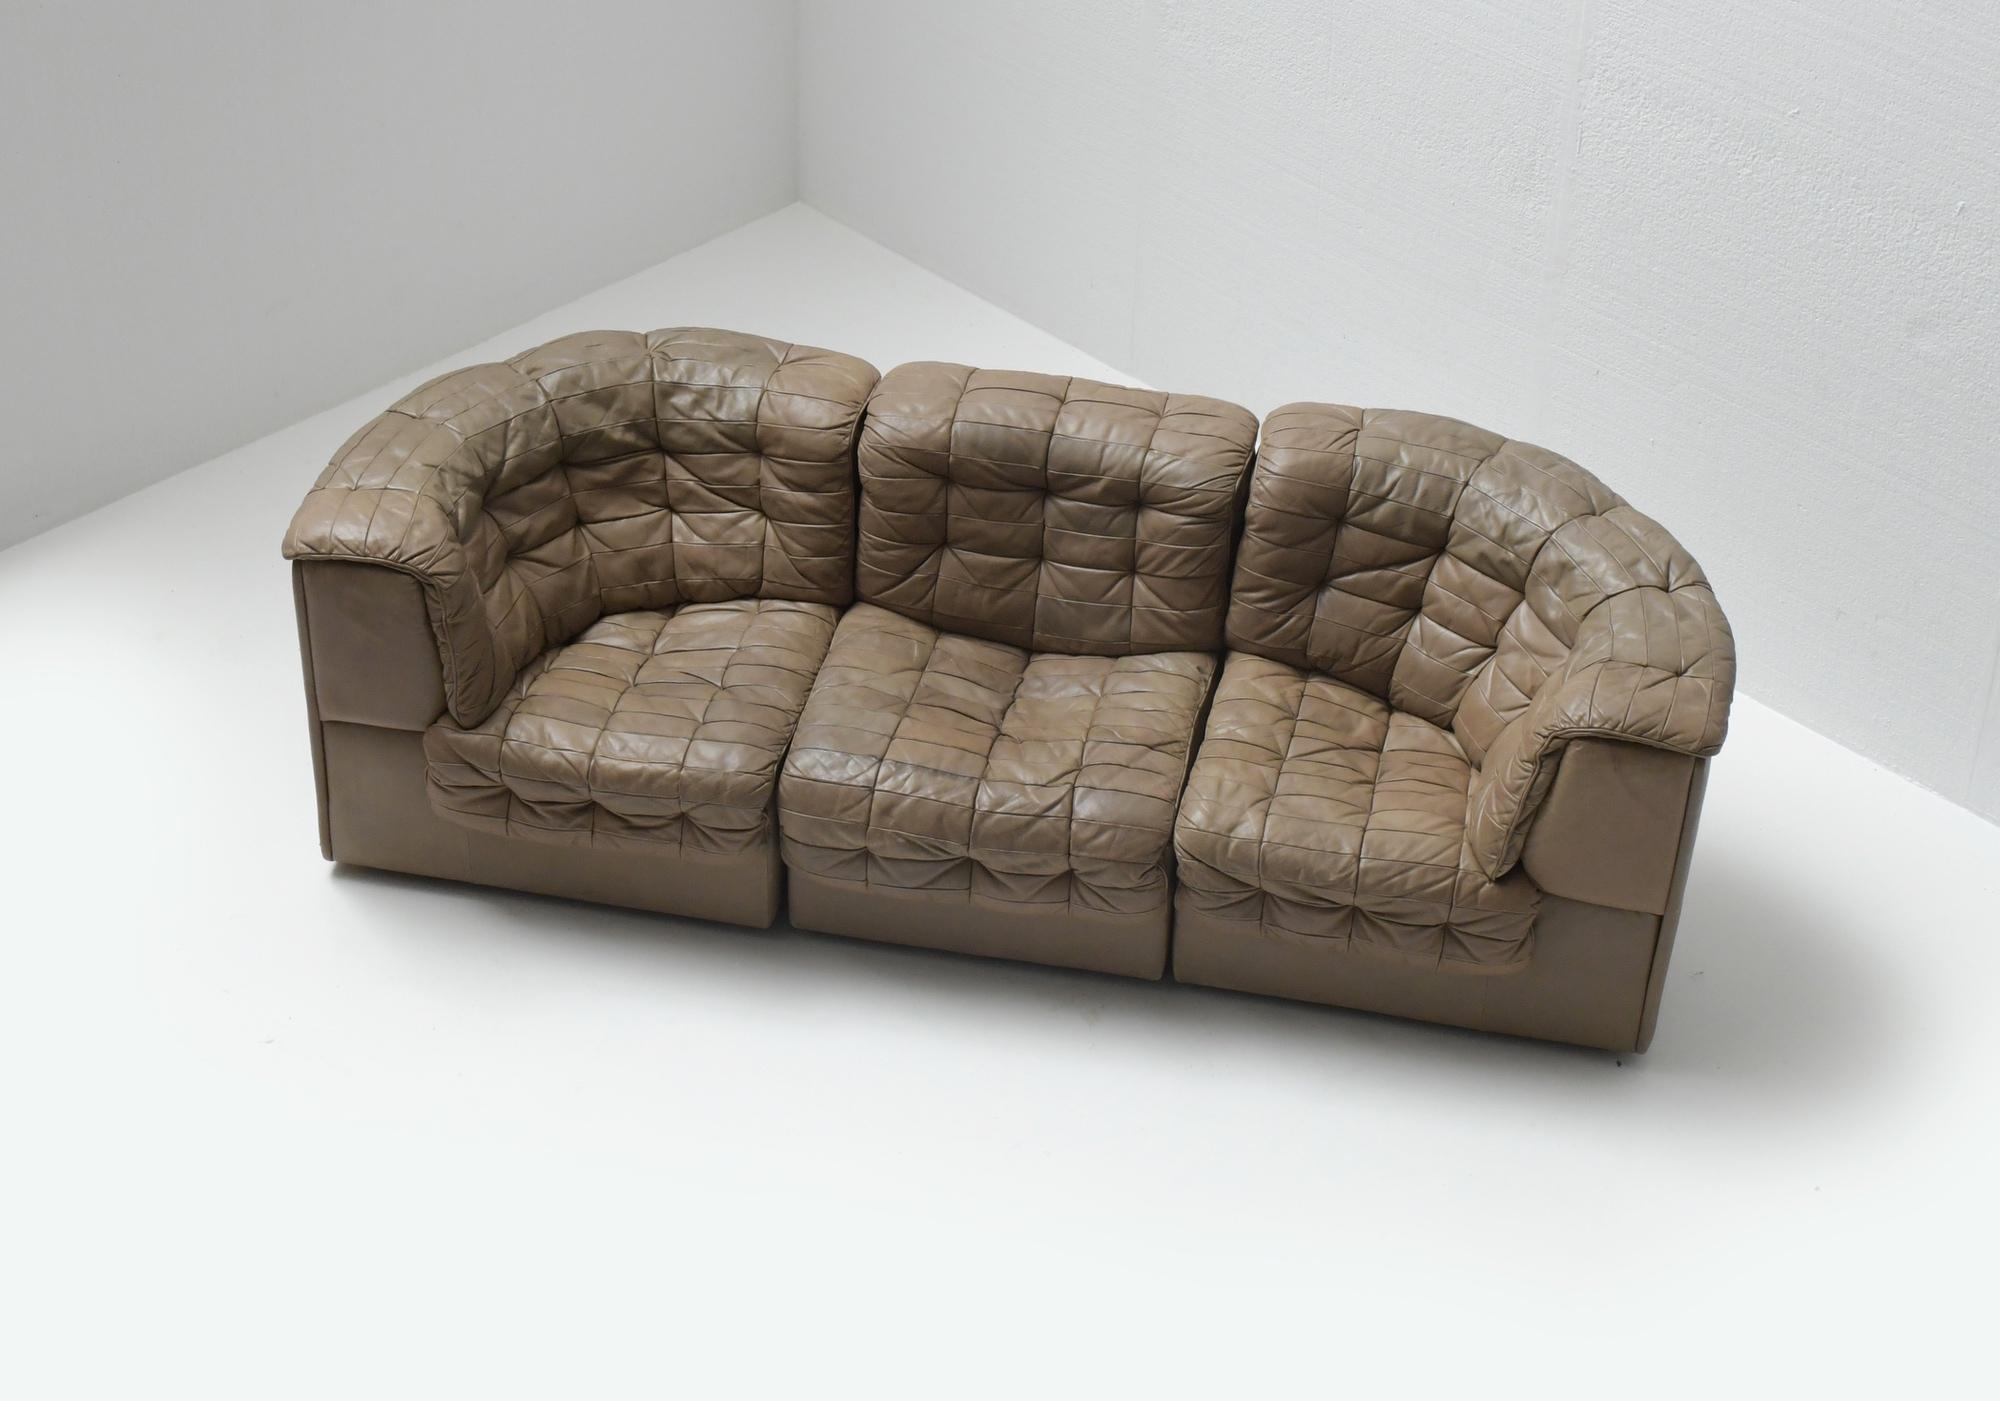 Mid-Century Modern Ds 11 Modular Sofa in Brown Patchwork Leather by De Sede Team for De Sede Swiss For Sale